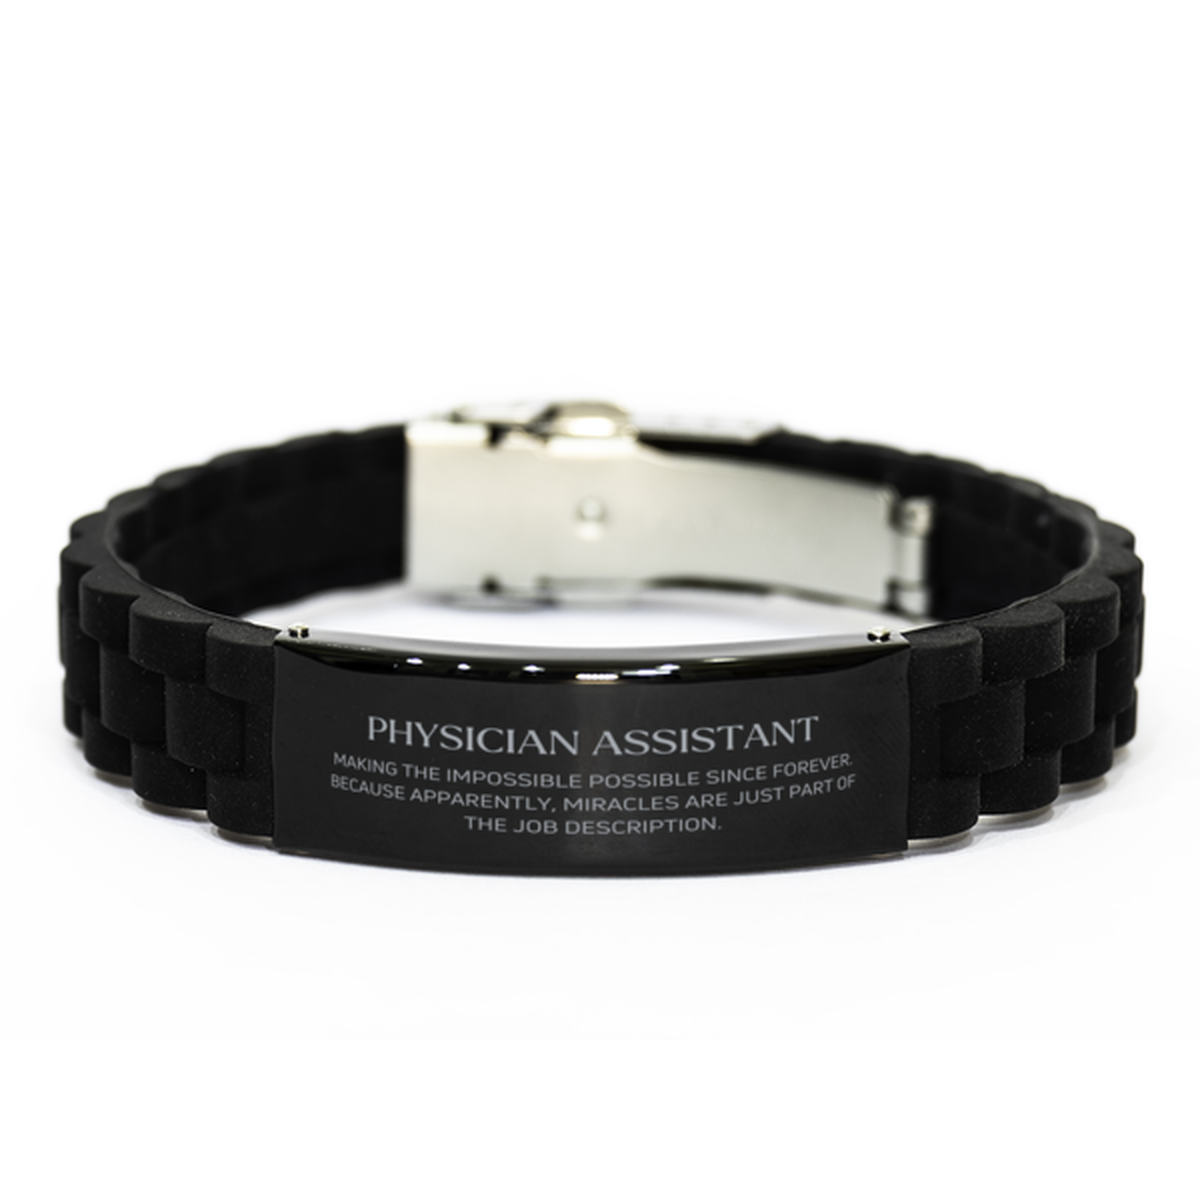 Funny Physician Assistant Gifts, Miracles are just part of the job description, Inspirational Birthday Black Glidelock Clasp Bracelet For Physician Assistant, Men, Women, Coworkers, Friends, Boss